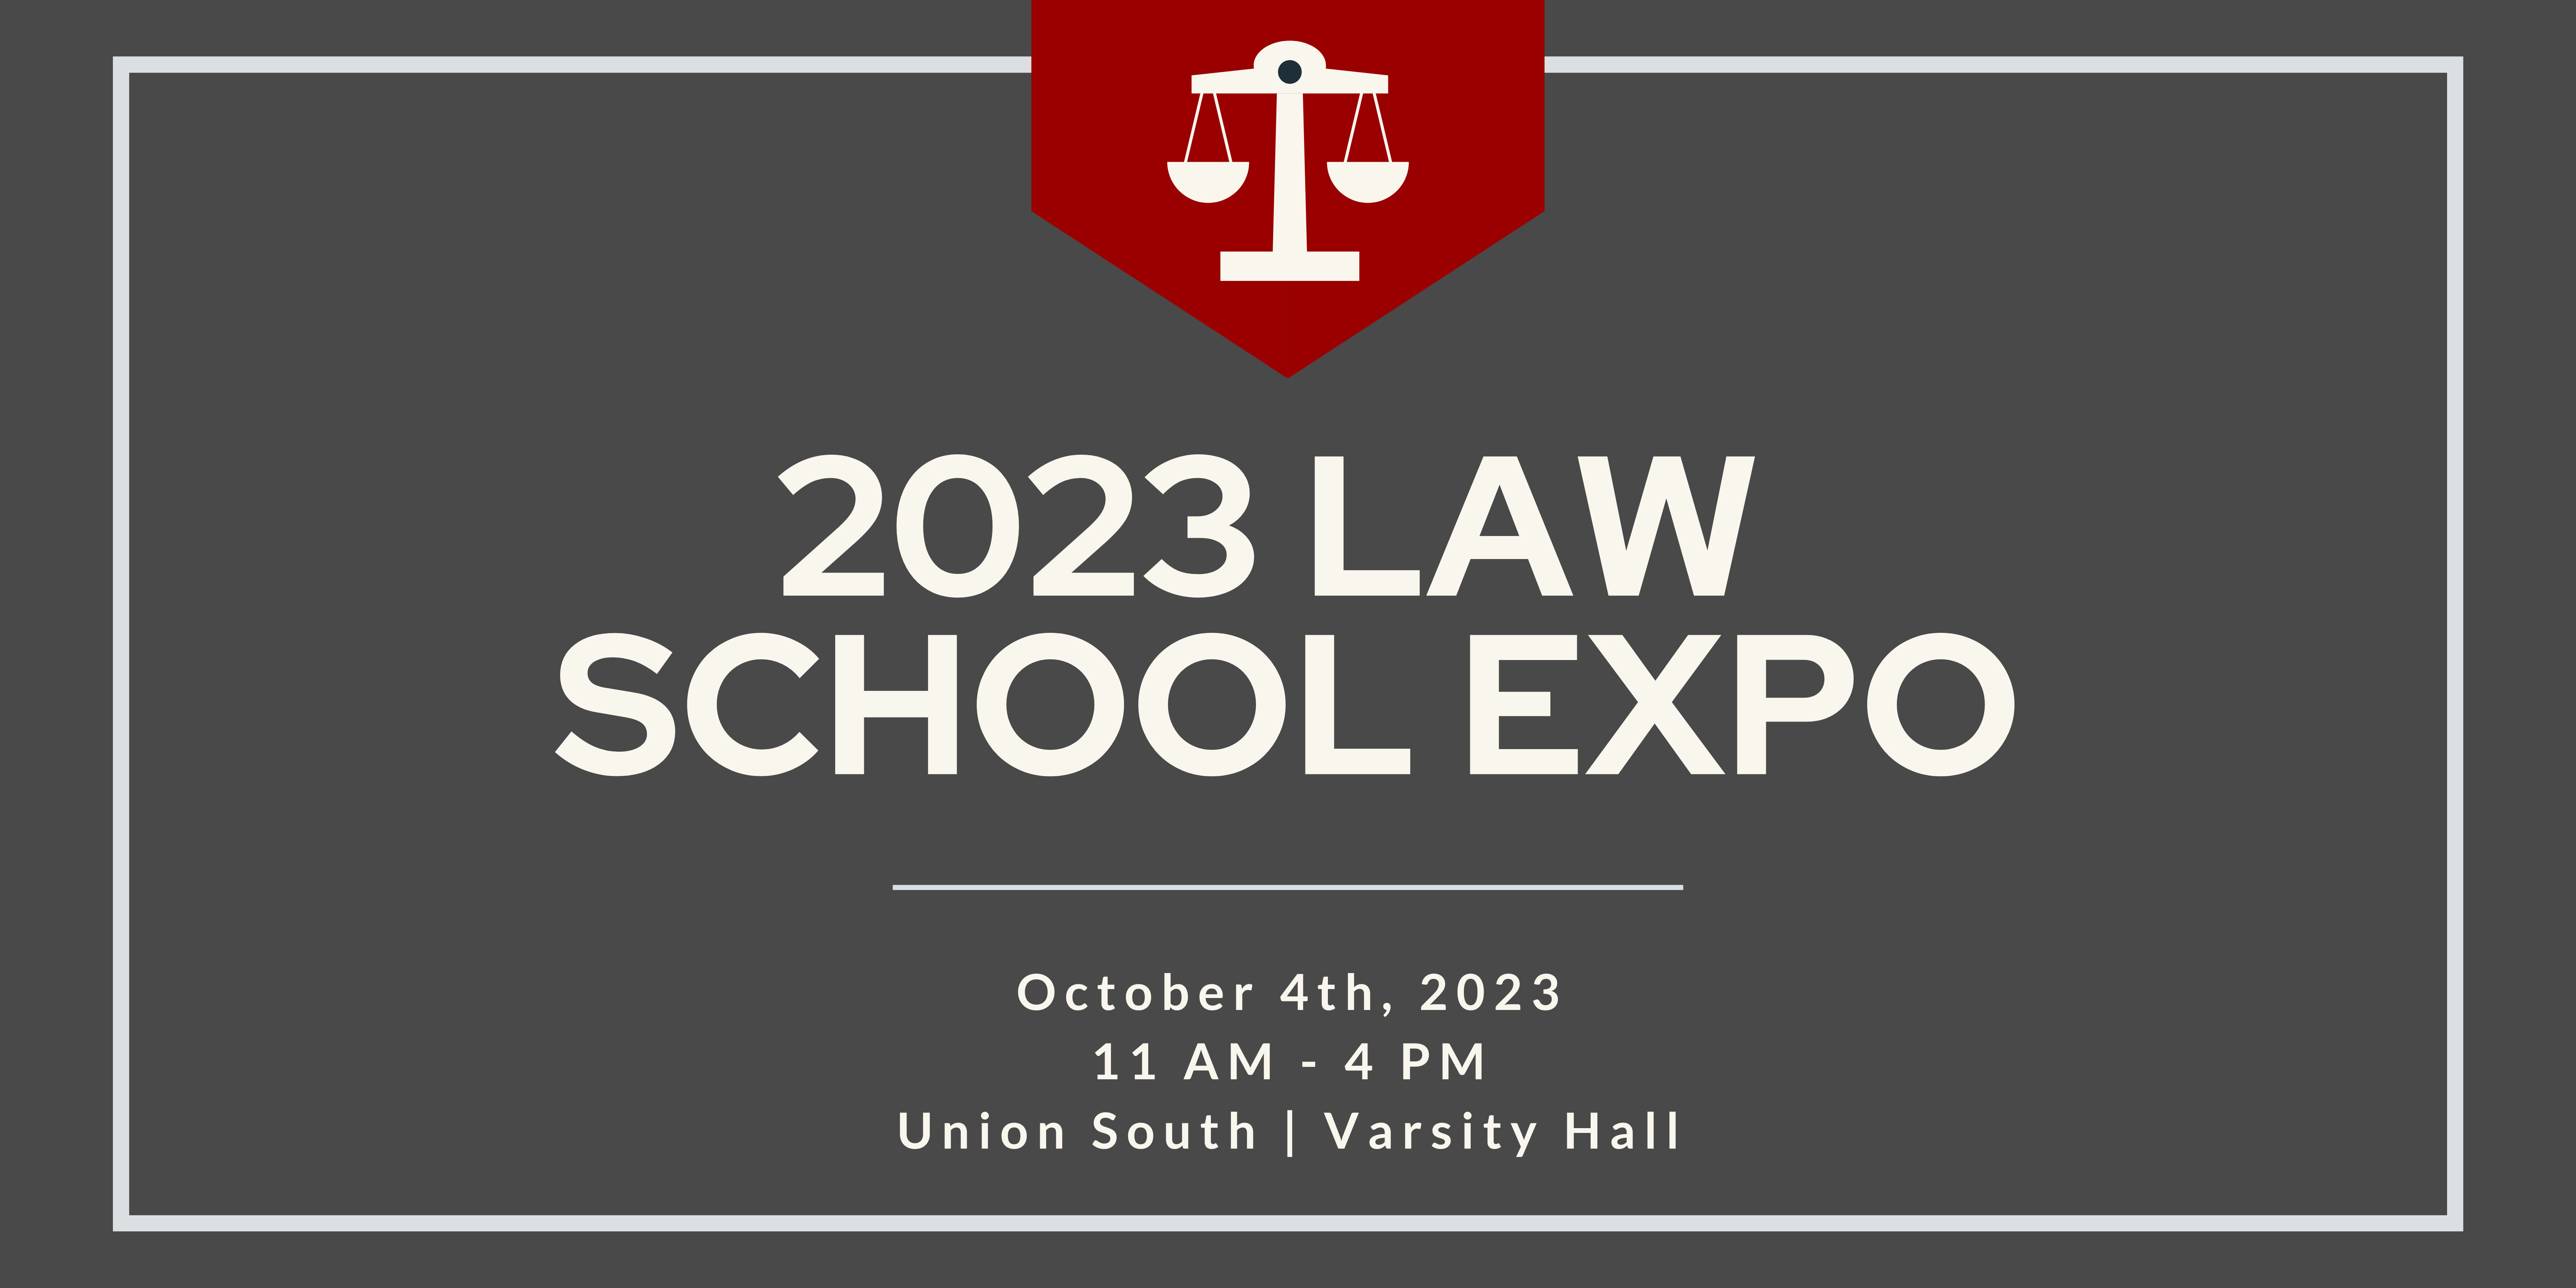 Fall 2023 Law School Expo banner promoting the event on October 4th, 2023, from 11 am to 4 pm, held at Union South Varsity Hall.